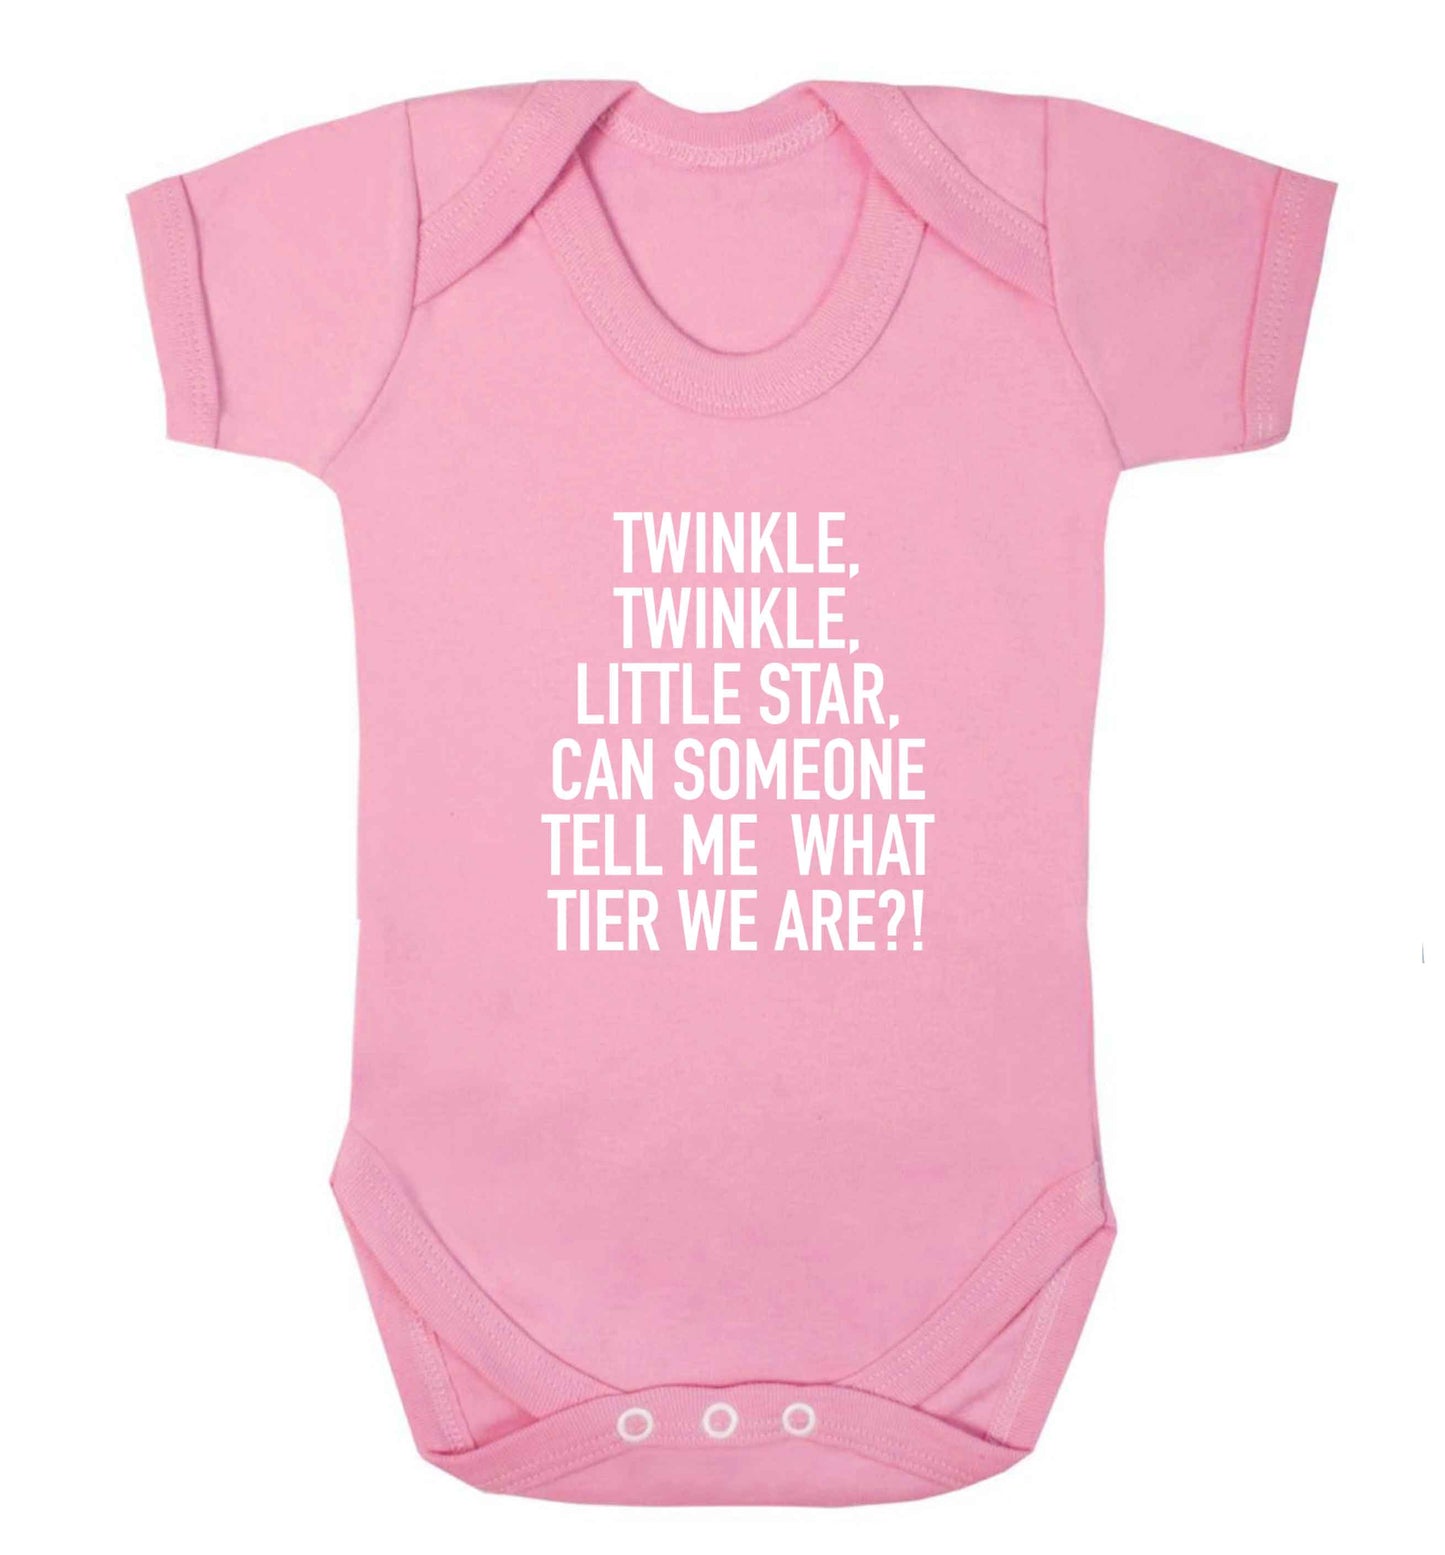 Twinkle twinkle, little star does anyone know what tier we are? baby vest pale pink 18-24 months